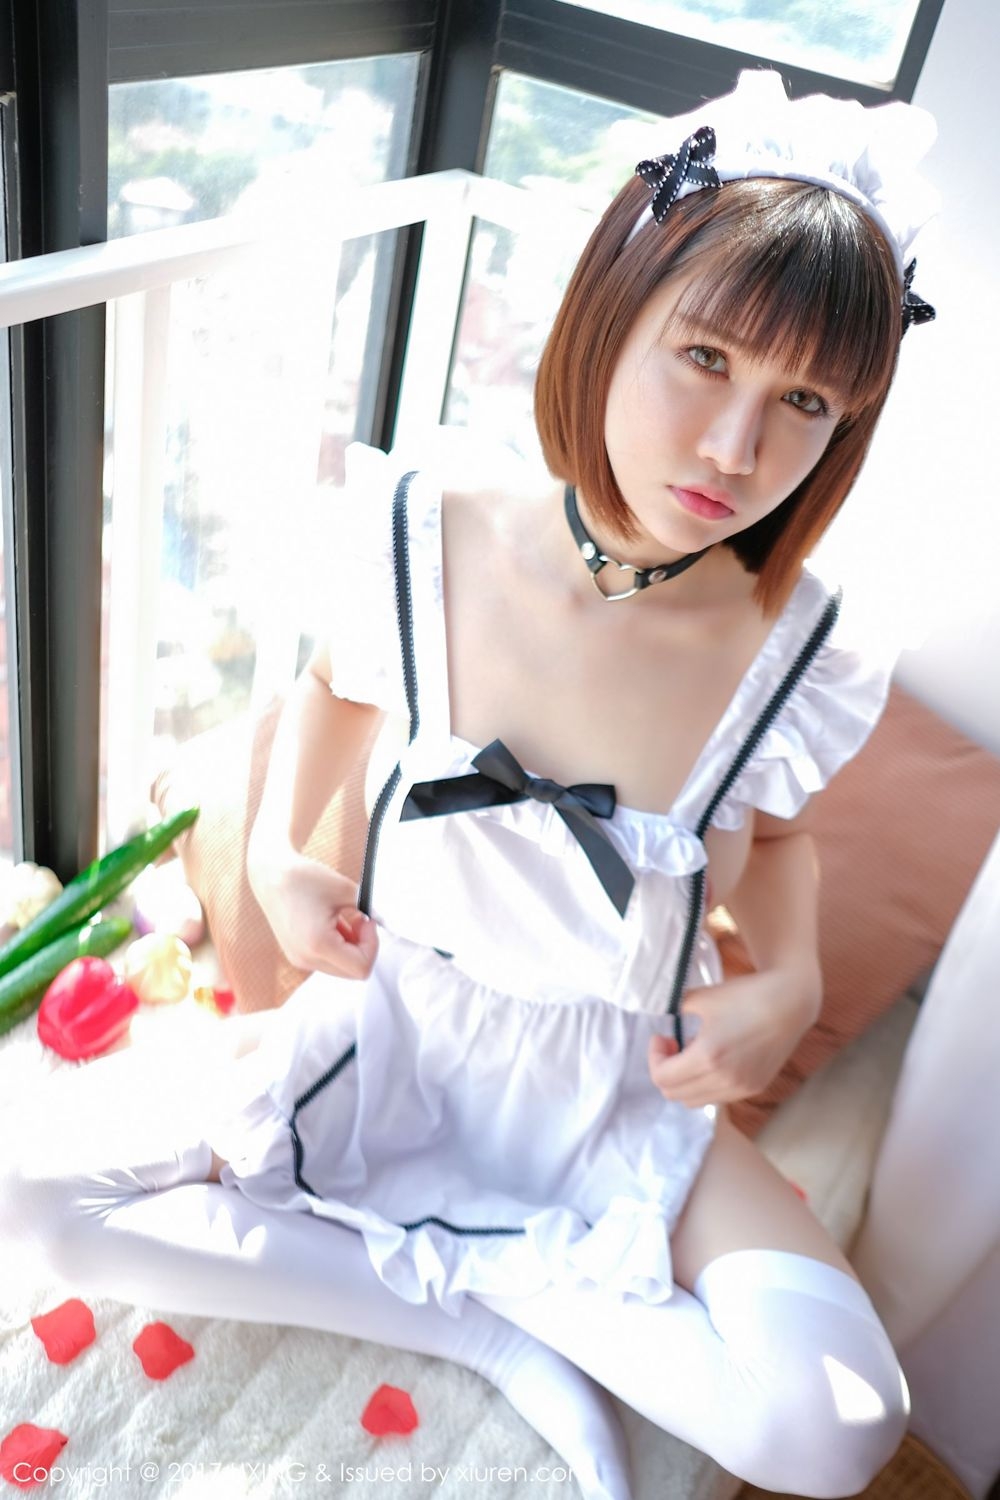 Maid outfit uniform temptation proud jiao meng Ming yan as a person tomato cucumber welfare picture(7)